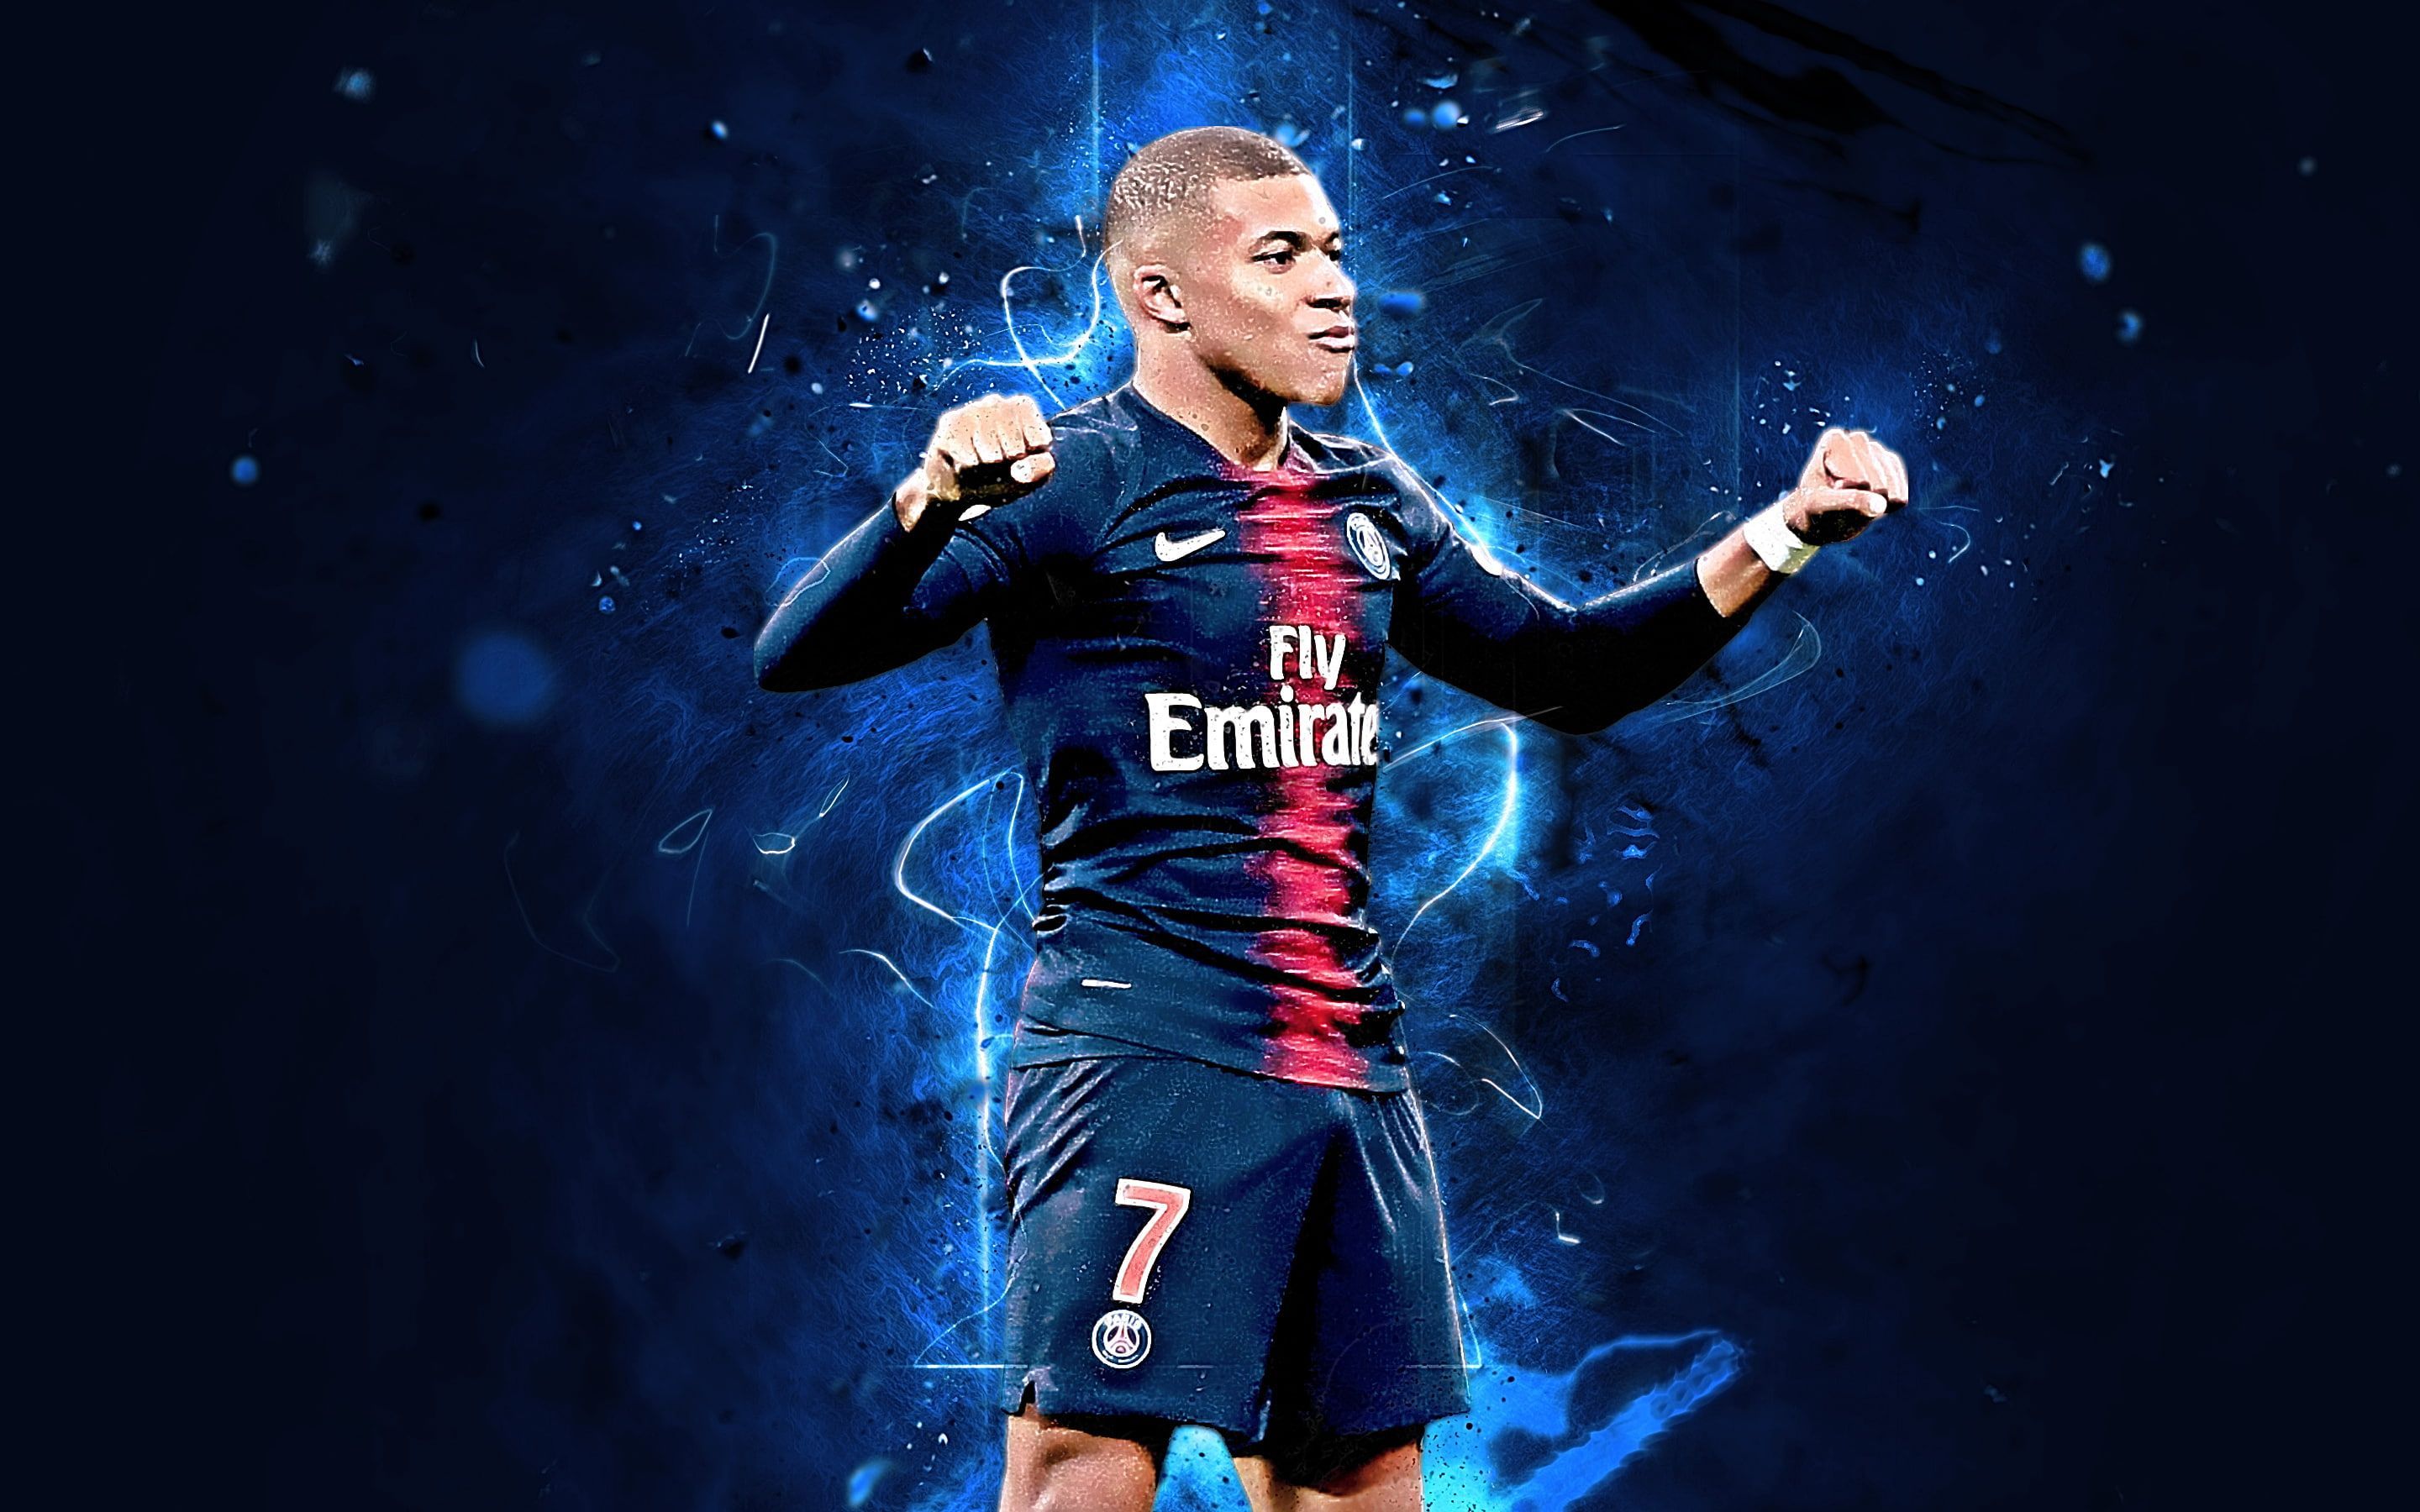 Kylian Mbappe wallpaper 2019, 4K, HD images, backgrounds, photos and pictures - Soccer